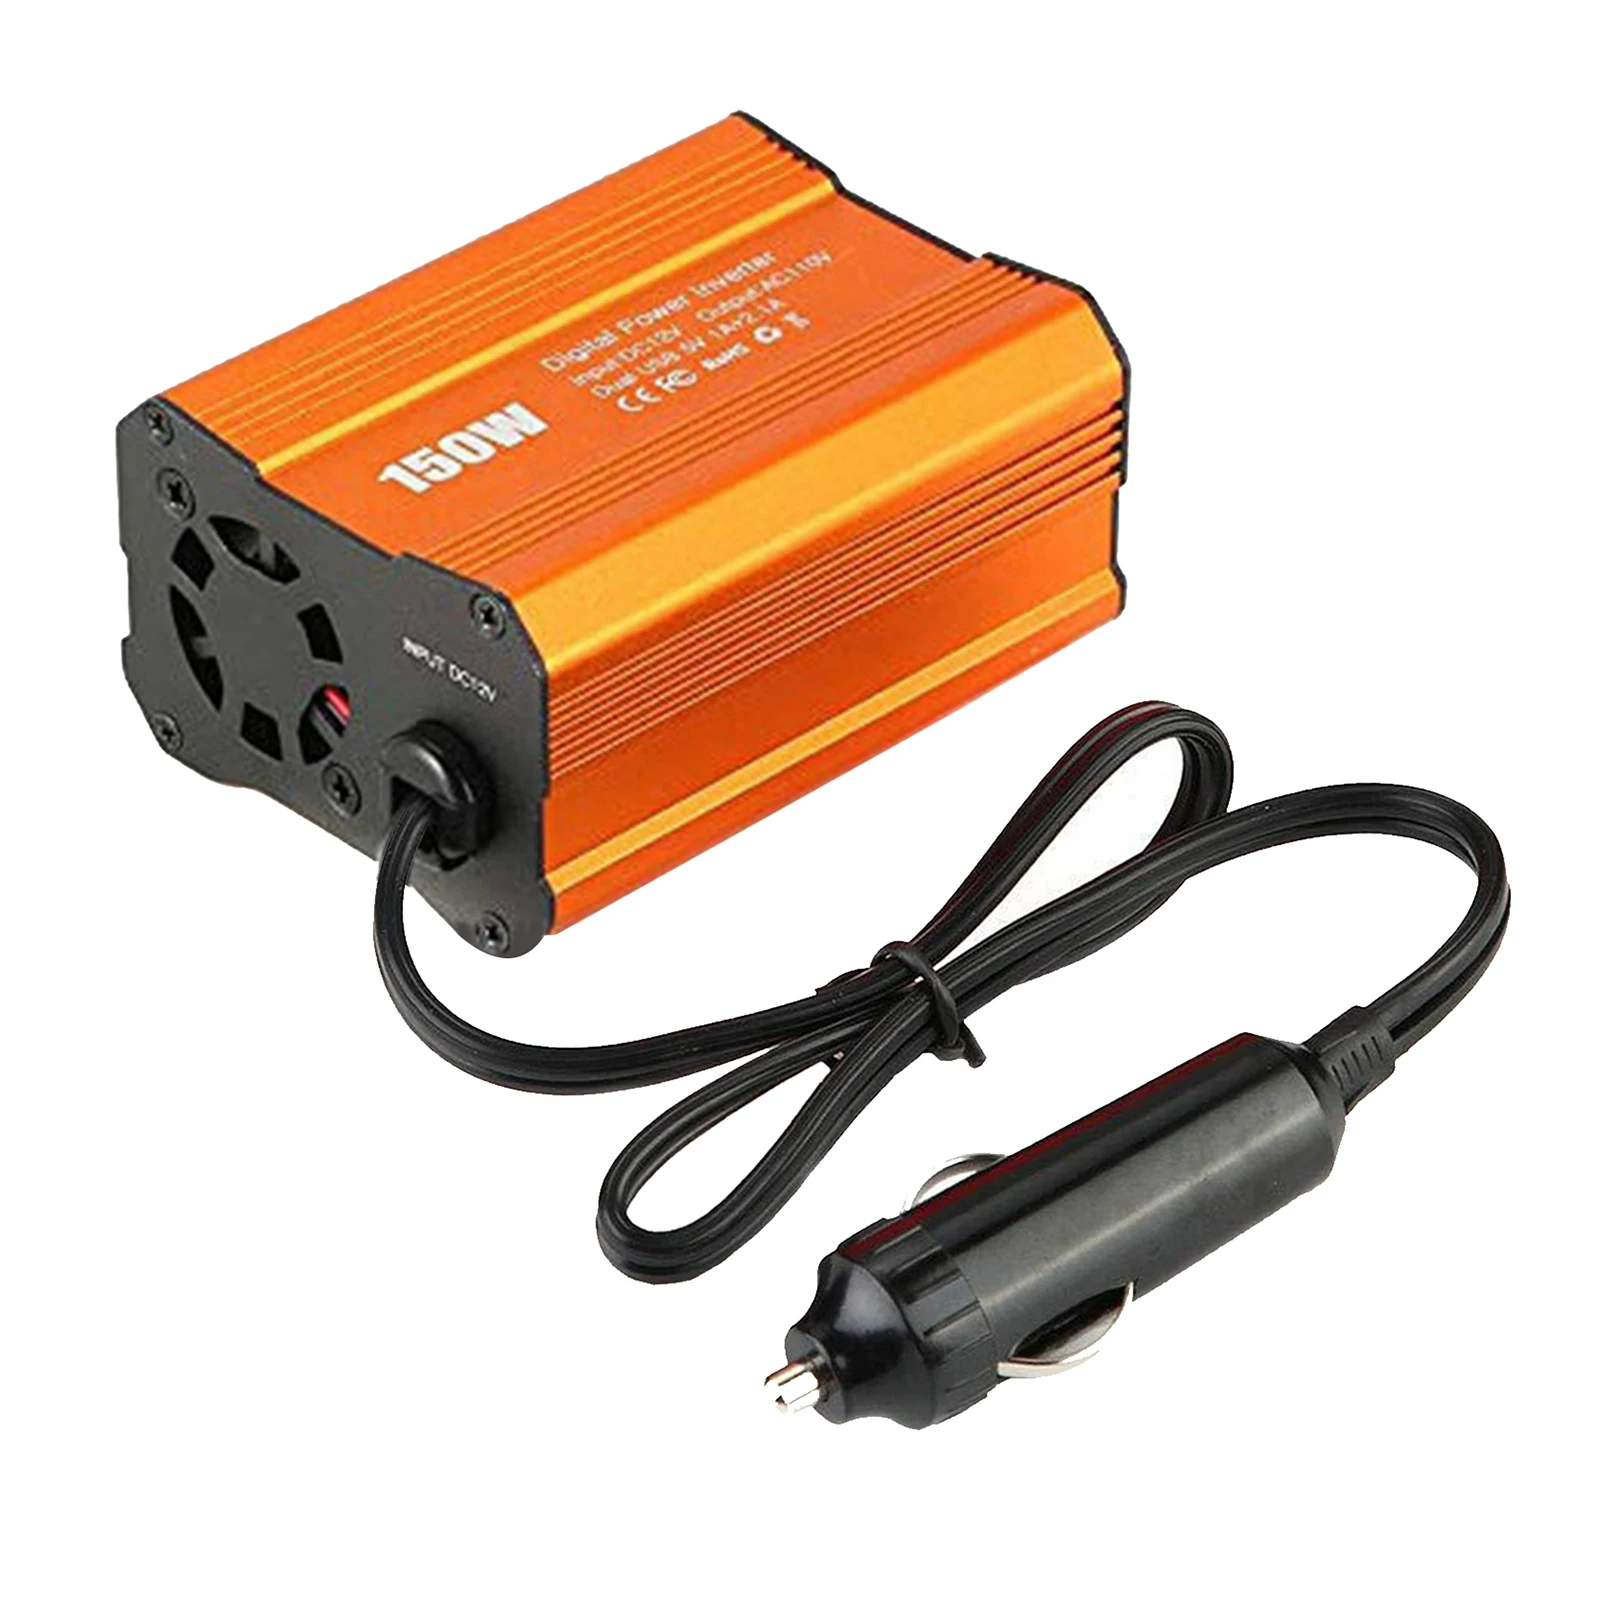 150W Car Power Inverter inversor DC 12V To AC 220V 2.1A Dual USB Ports Car Charger Adapter